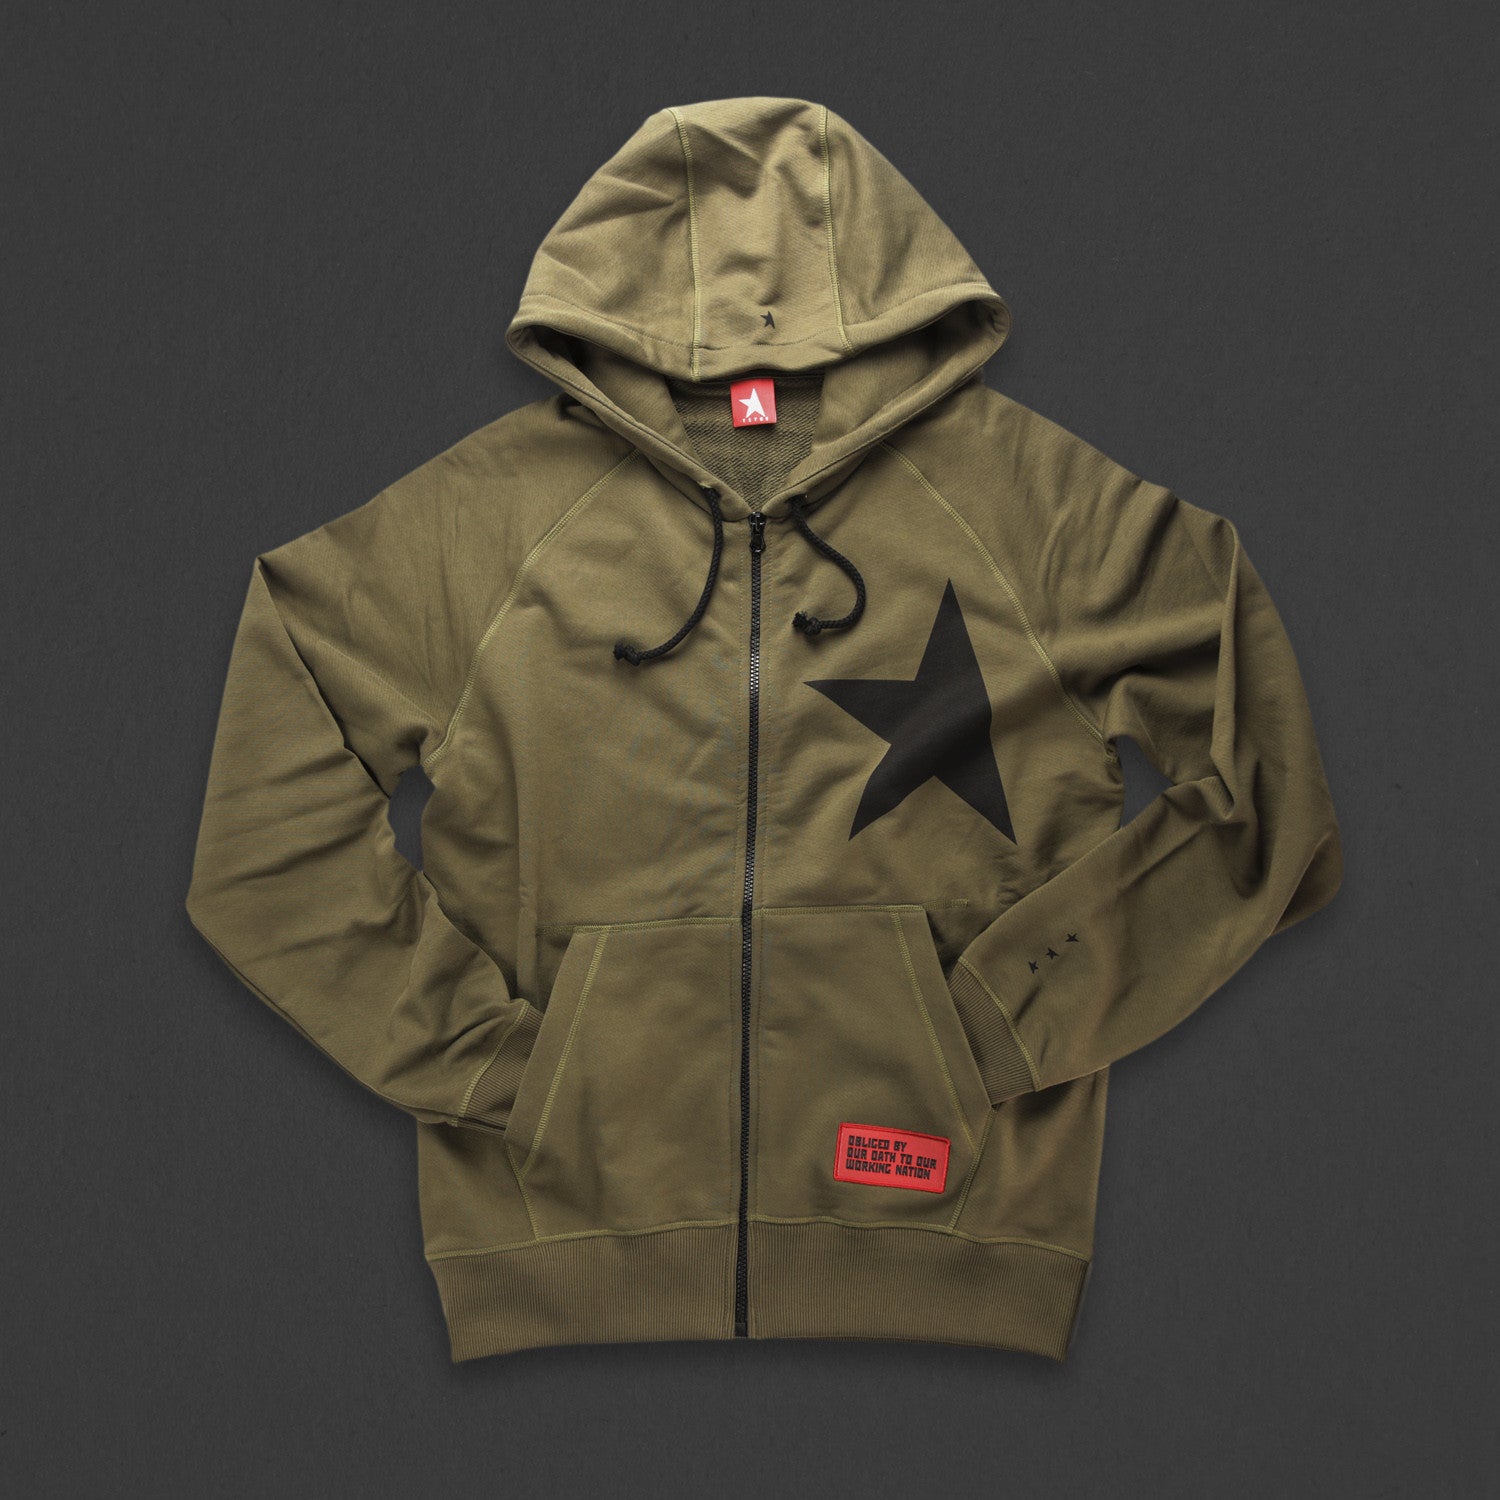 7th hoodie+zip olive/black with TITOS star logo